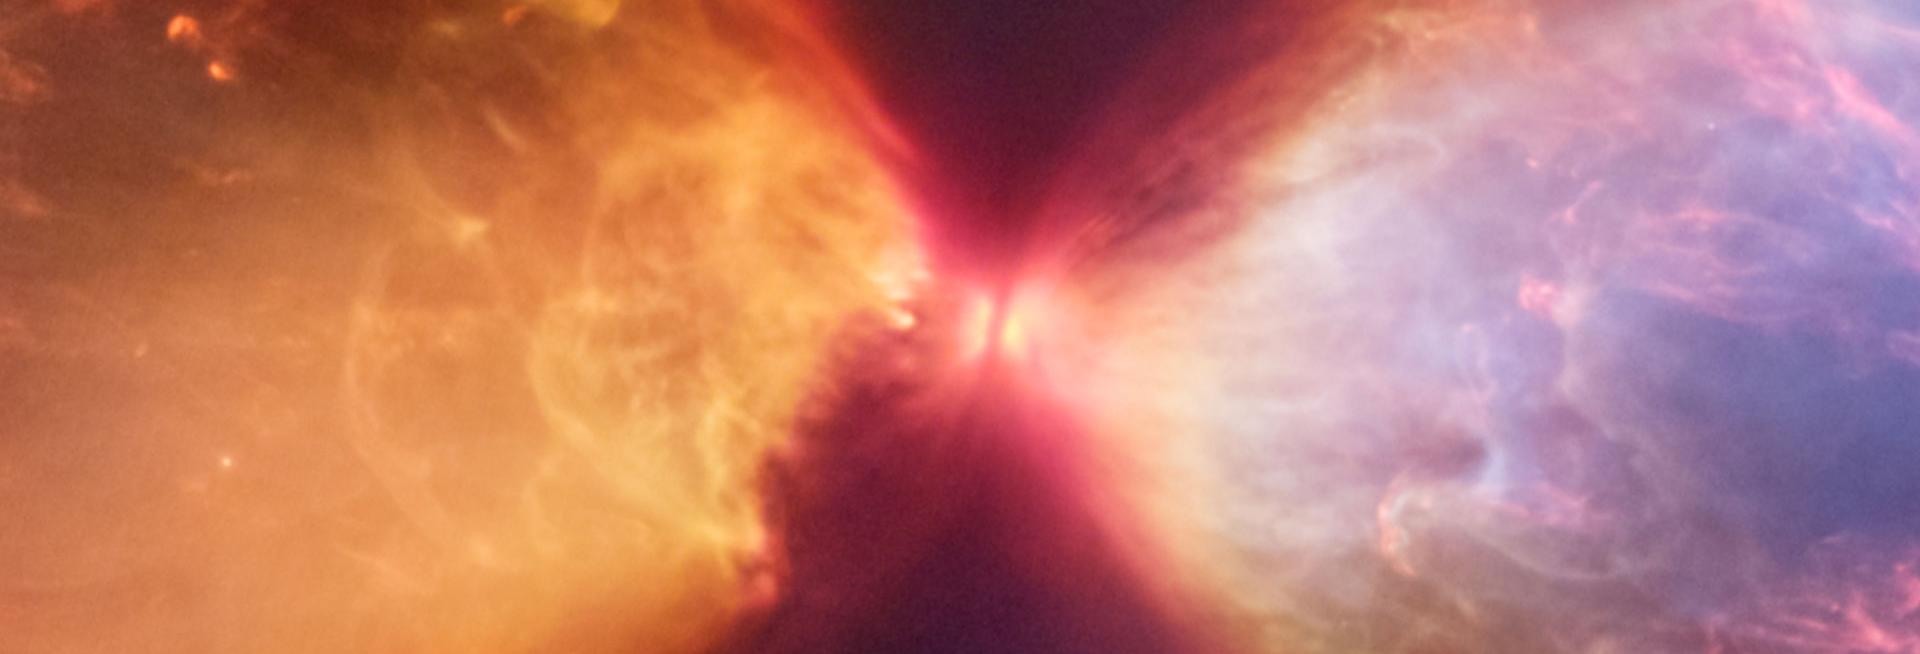 Image from the James Webb Space Telescope of protostar and disc